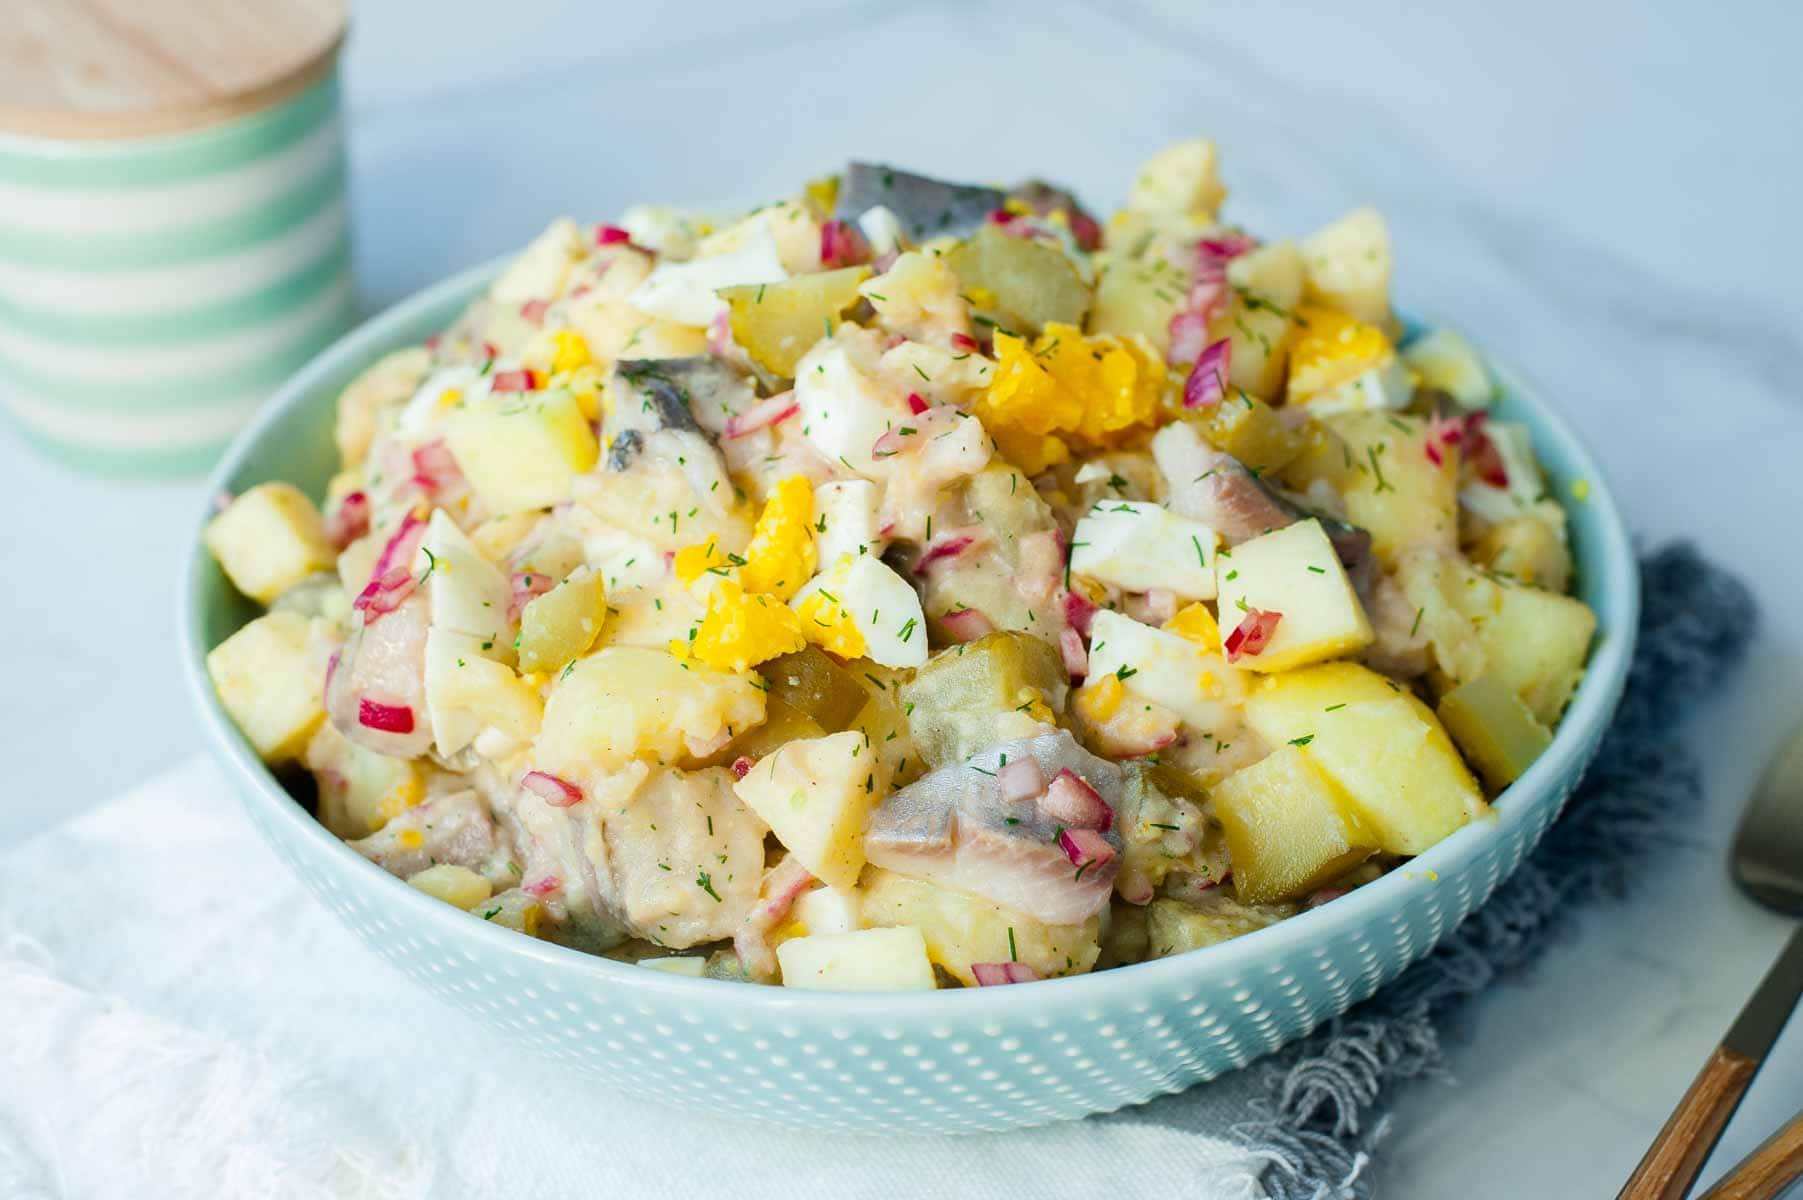 Herring Salad - with potatoes, eggs, pickles, and apples